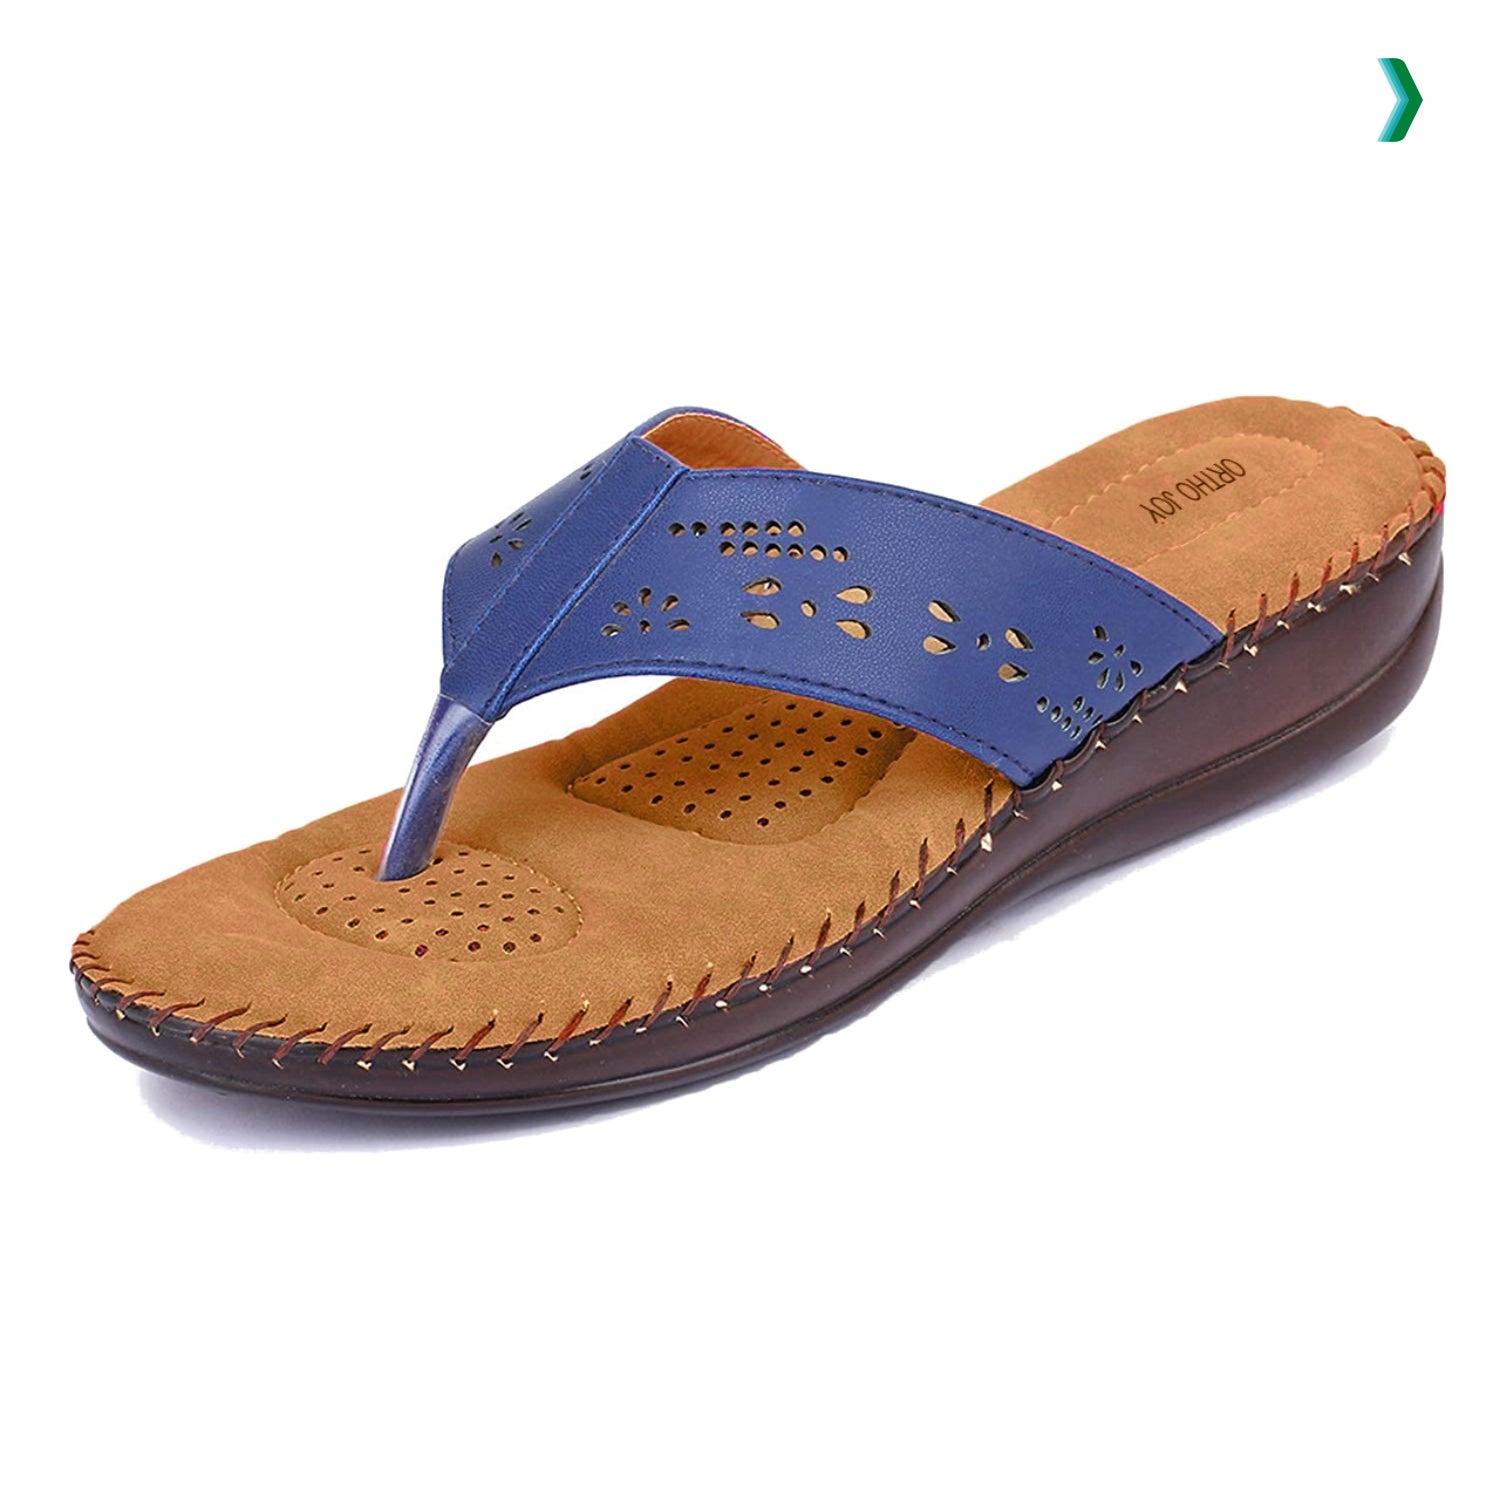 extra soft slippers for ladies, soft doctor chappal for ladies